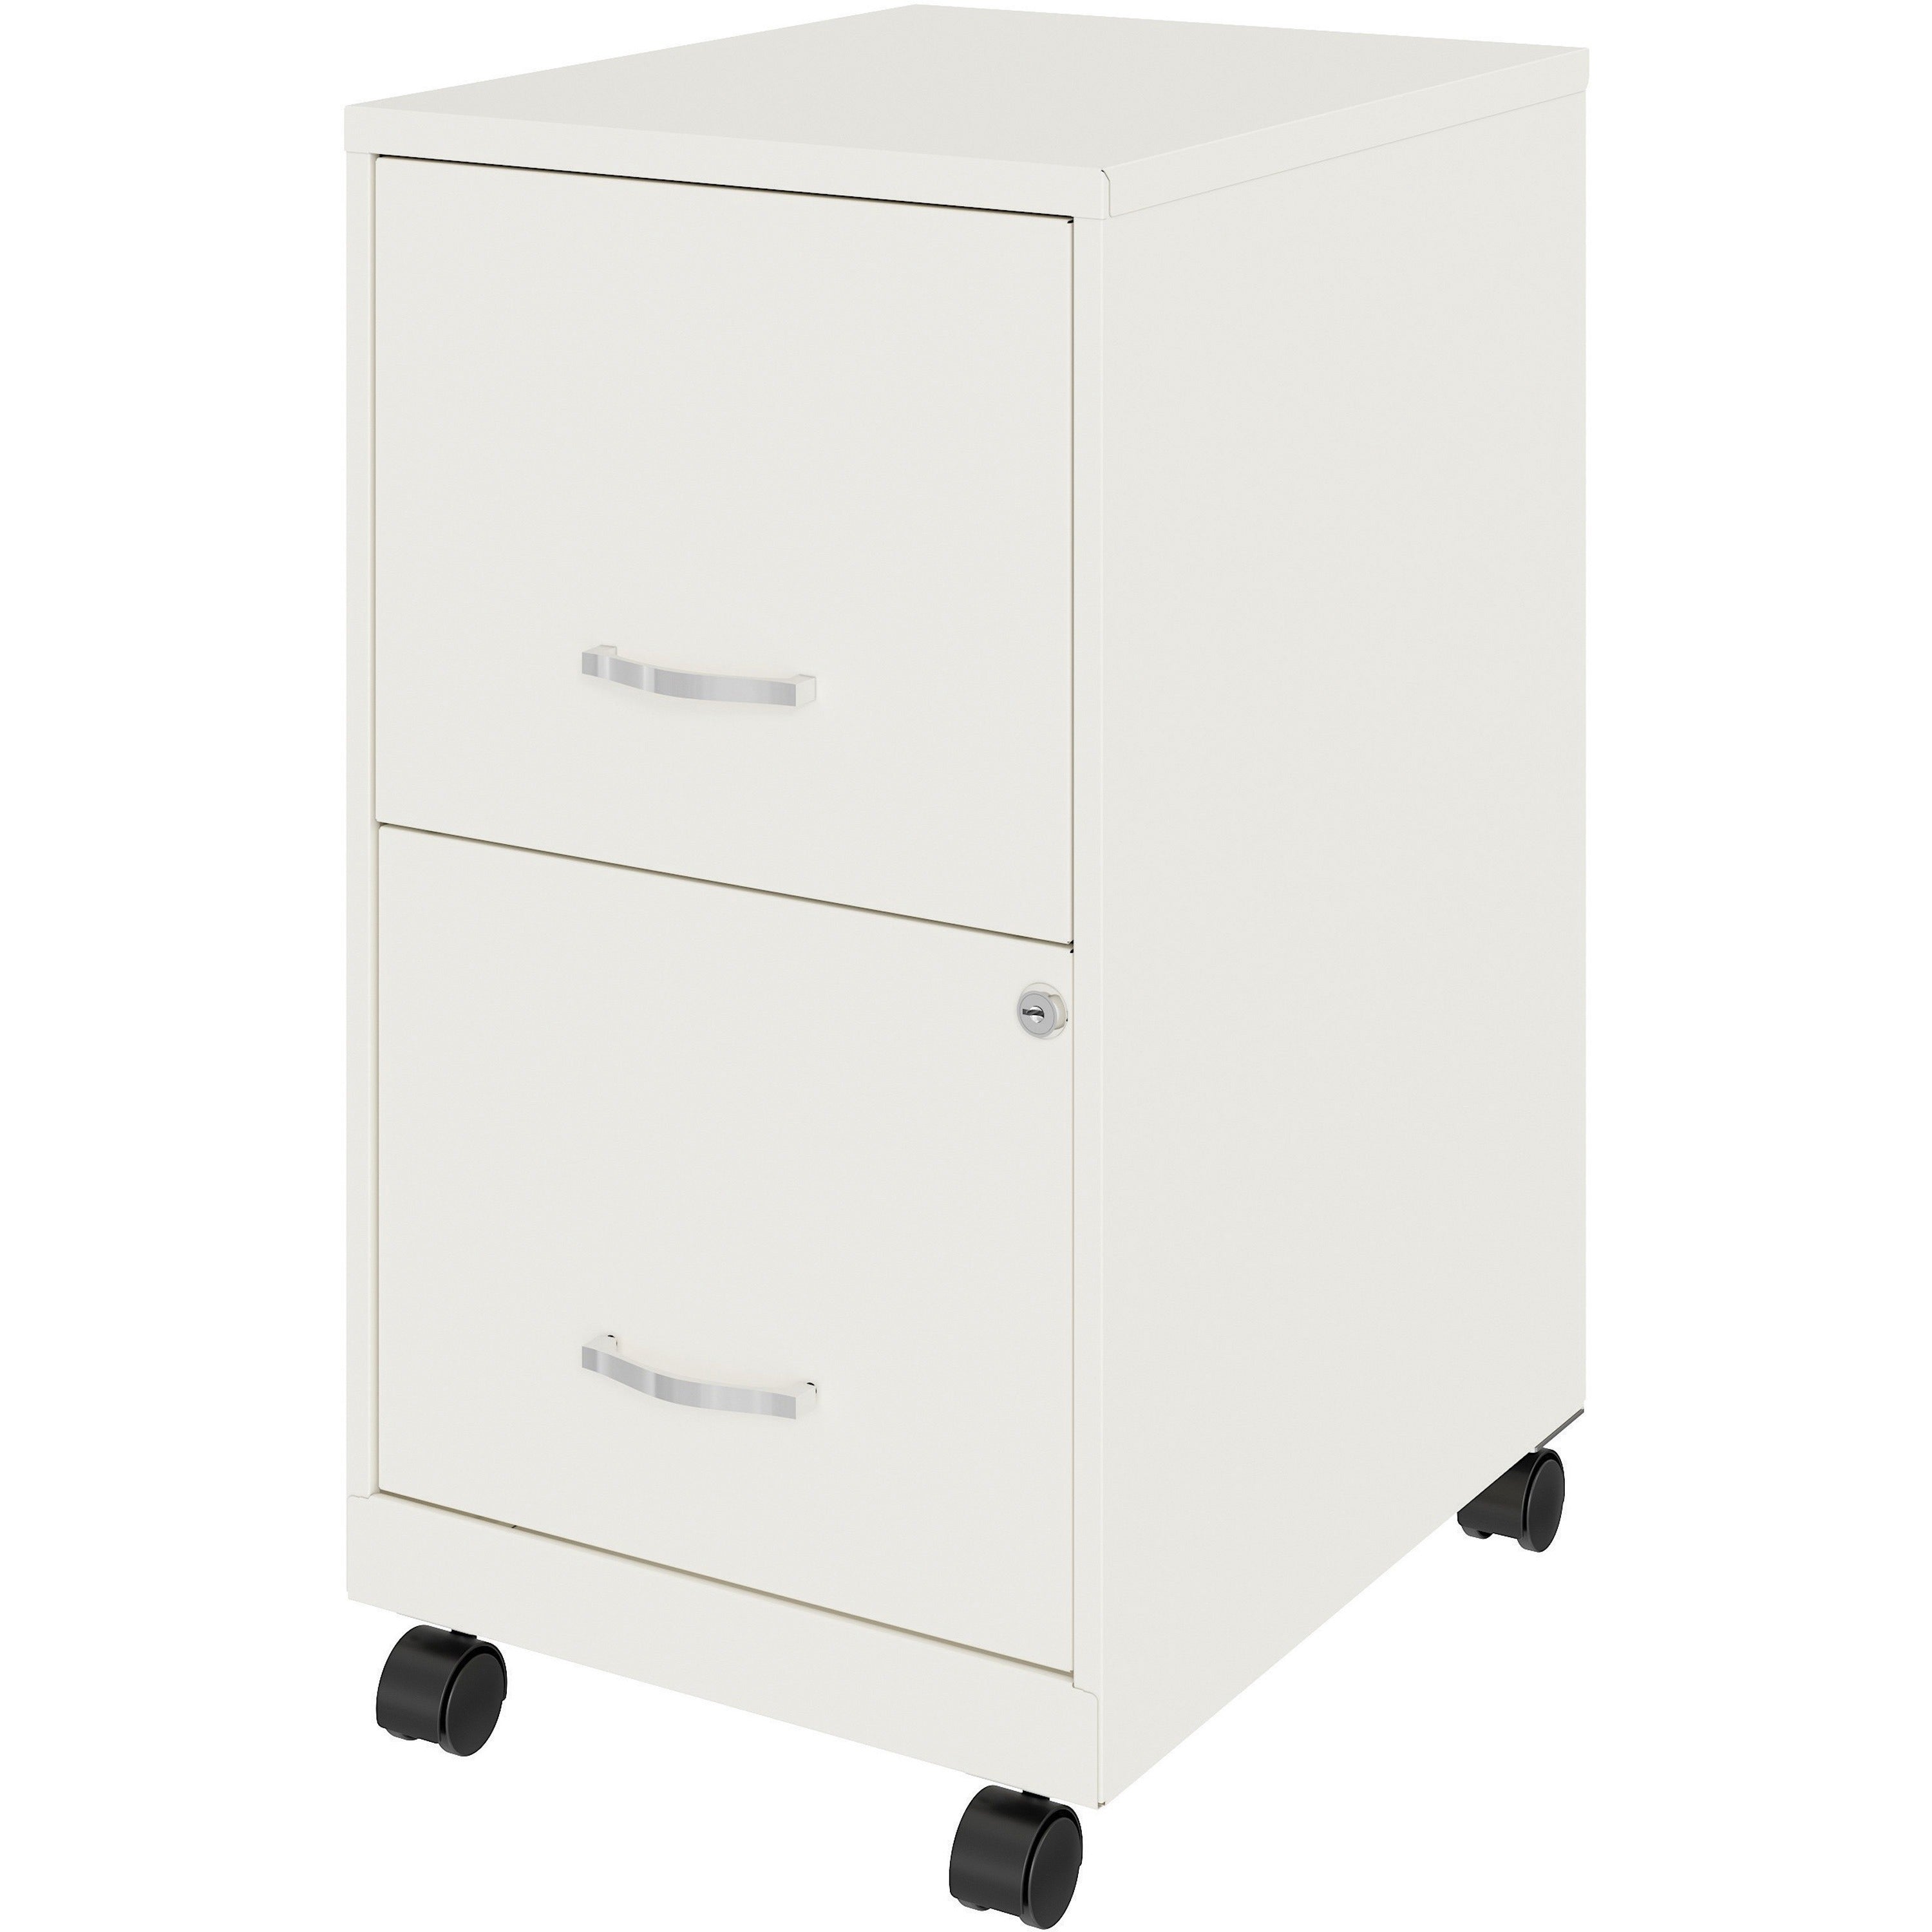 nusparc-mobile-file-cabinet-142-x-18-x-265-for-file-letter-mobility-locking-drawer-glide-suspension-3-4-drawer-extension-cam-lock-nonporous-surface-white-painted-steel-steel-recycled-assembly-required_nprvf218amwe - 4